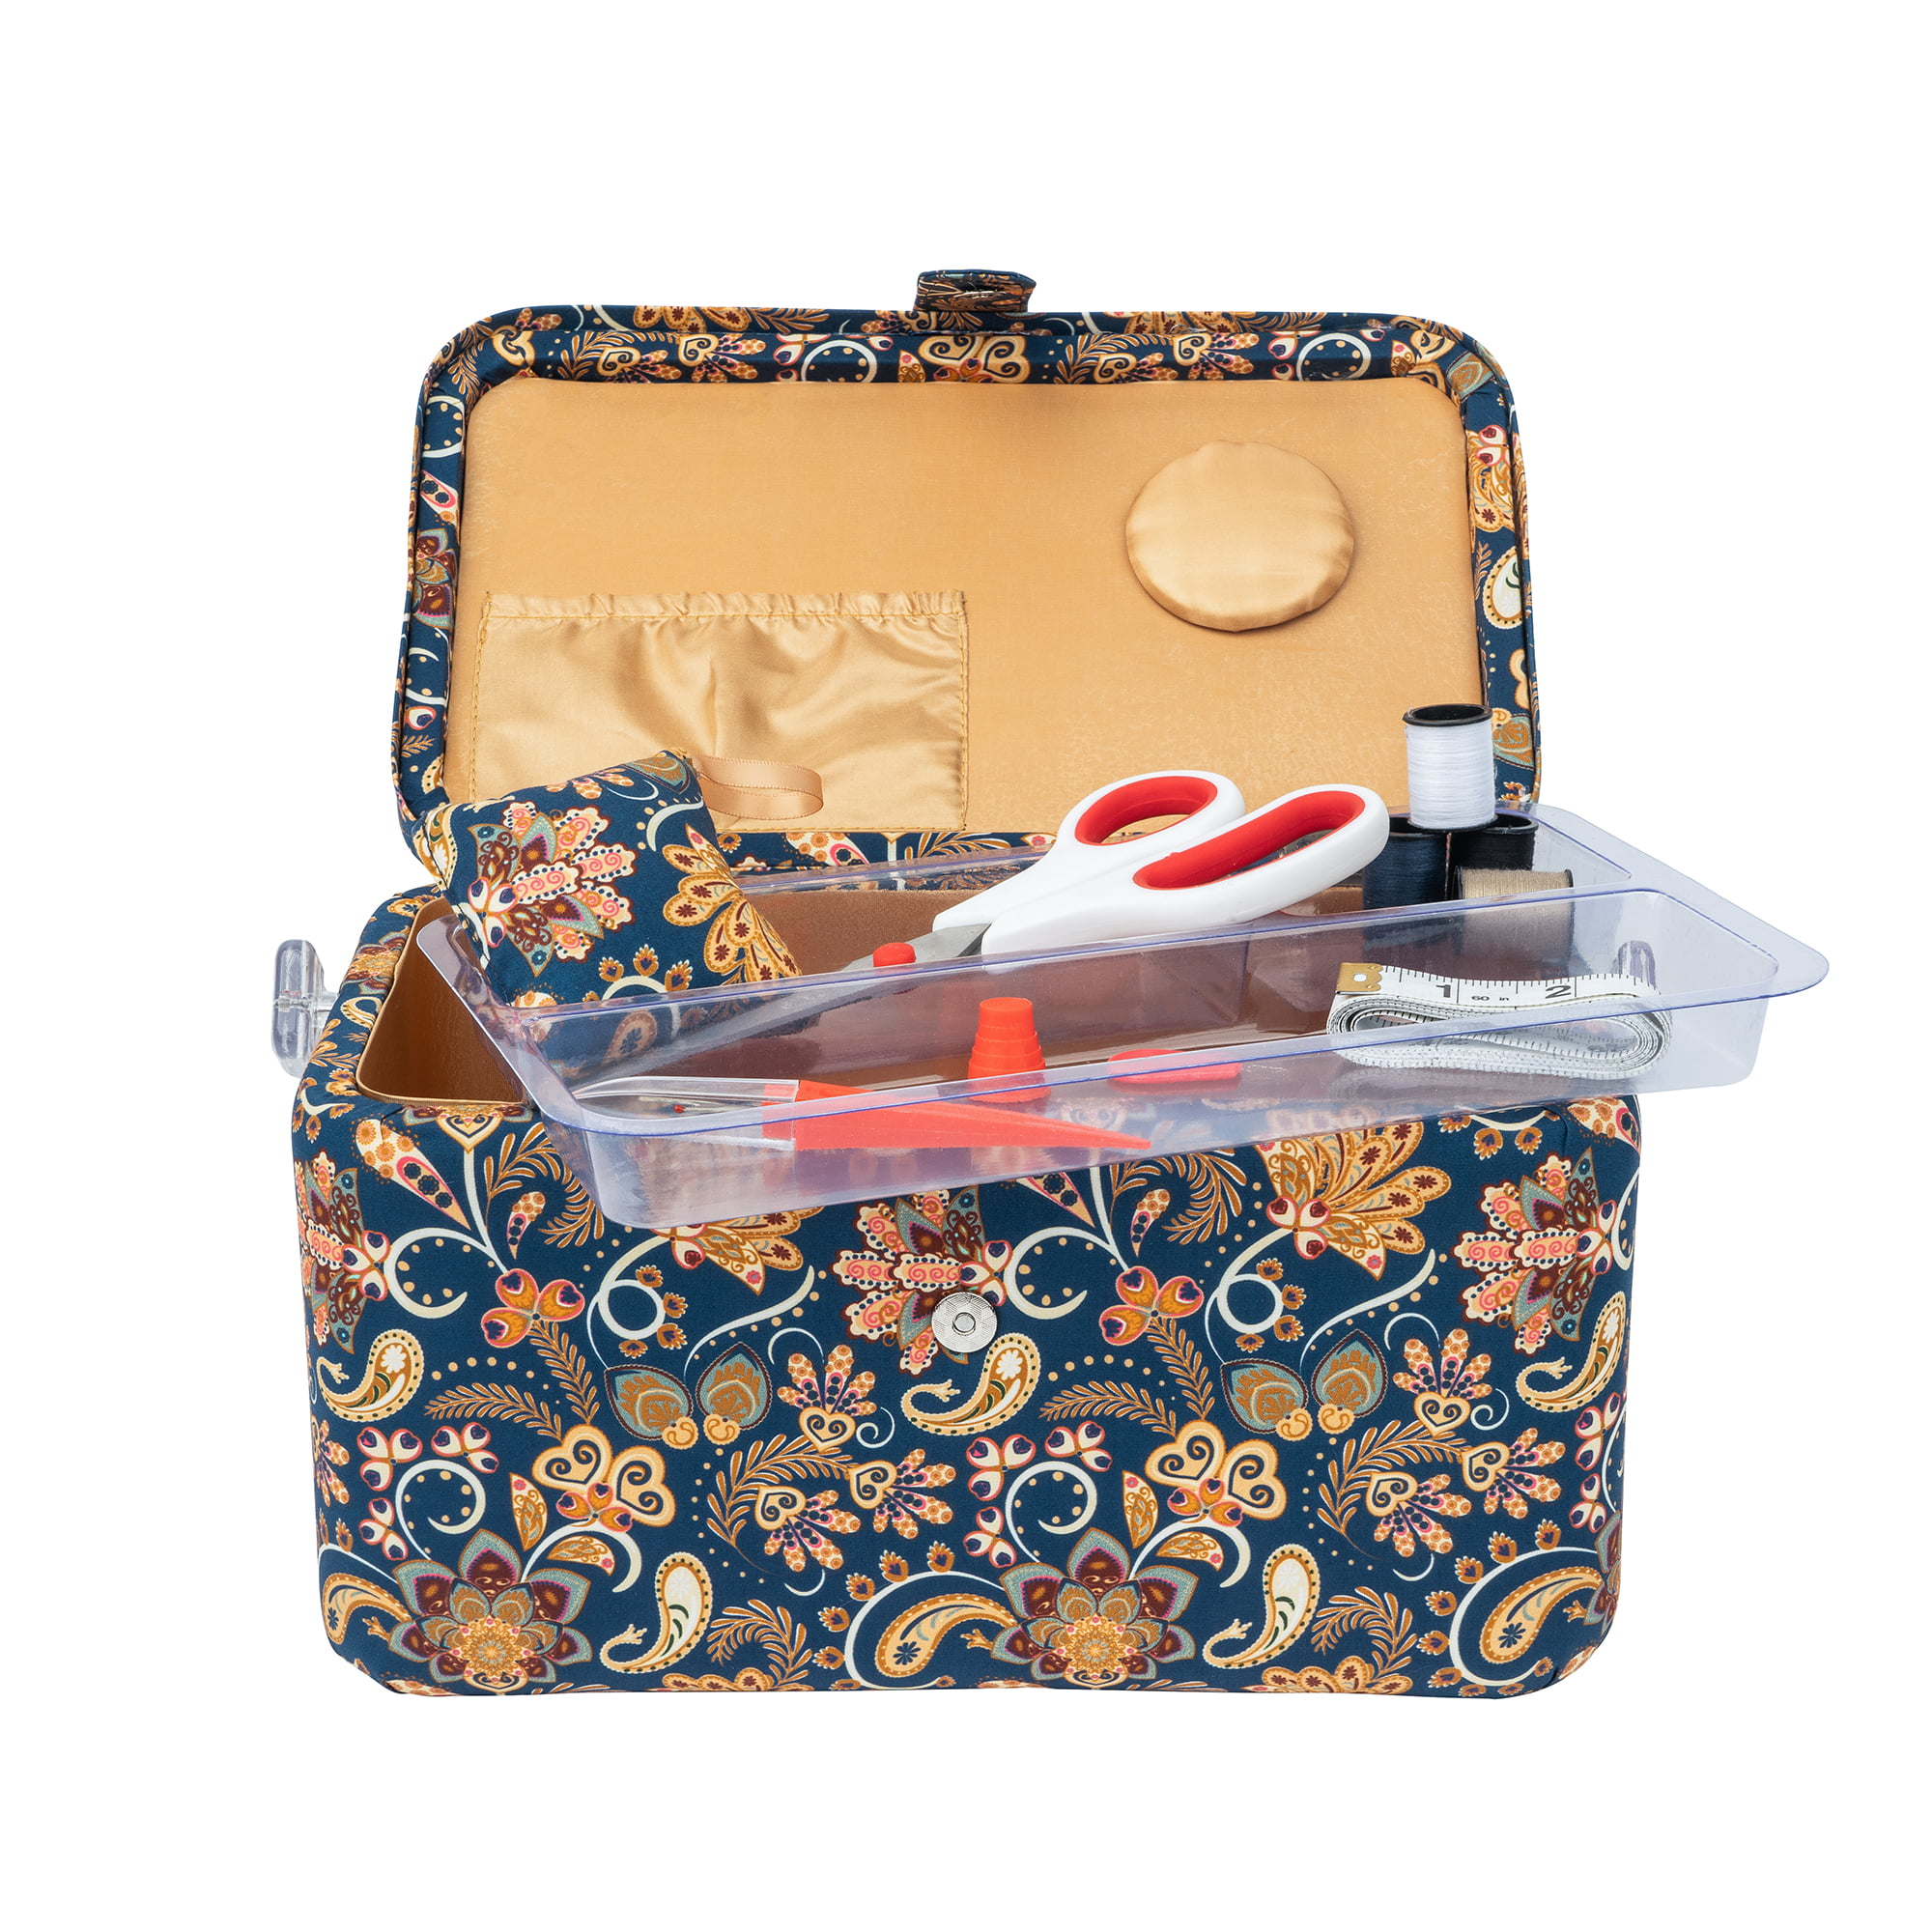 31 Days Singer Sewing Box - At Home With The Barkers